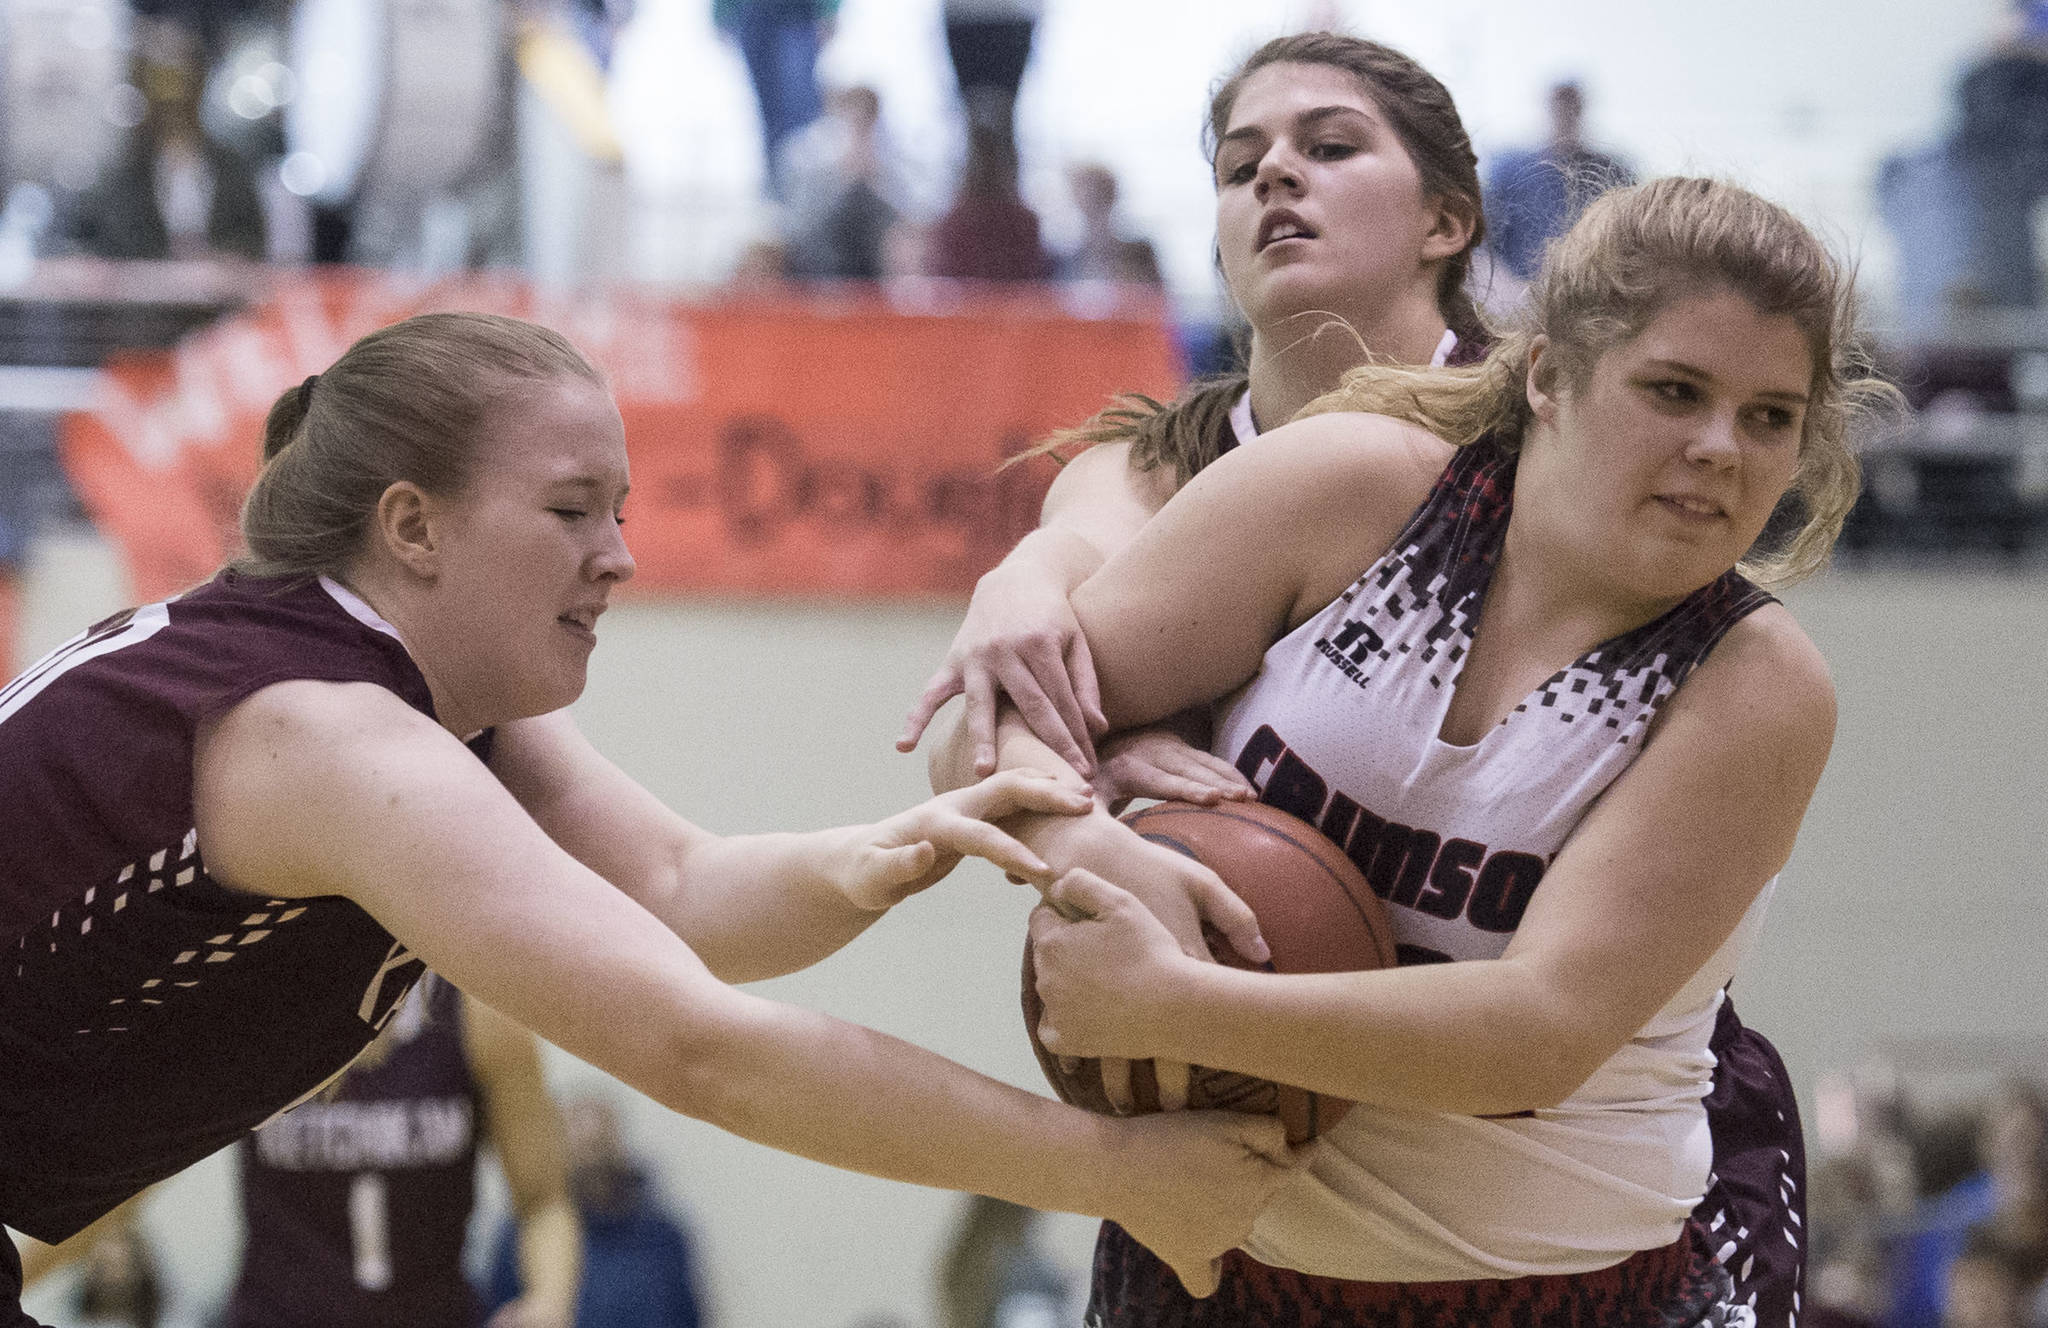 Juneau-Douglas competes against Ketchikan during the Region V Basketball finals at JDHS on Friday, March 10, 2017. Ketchikan won 41-39 to force a playoff game on Saturday. (Michael Penn | Juneau Empire)